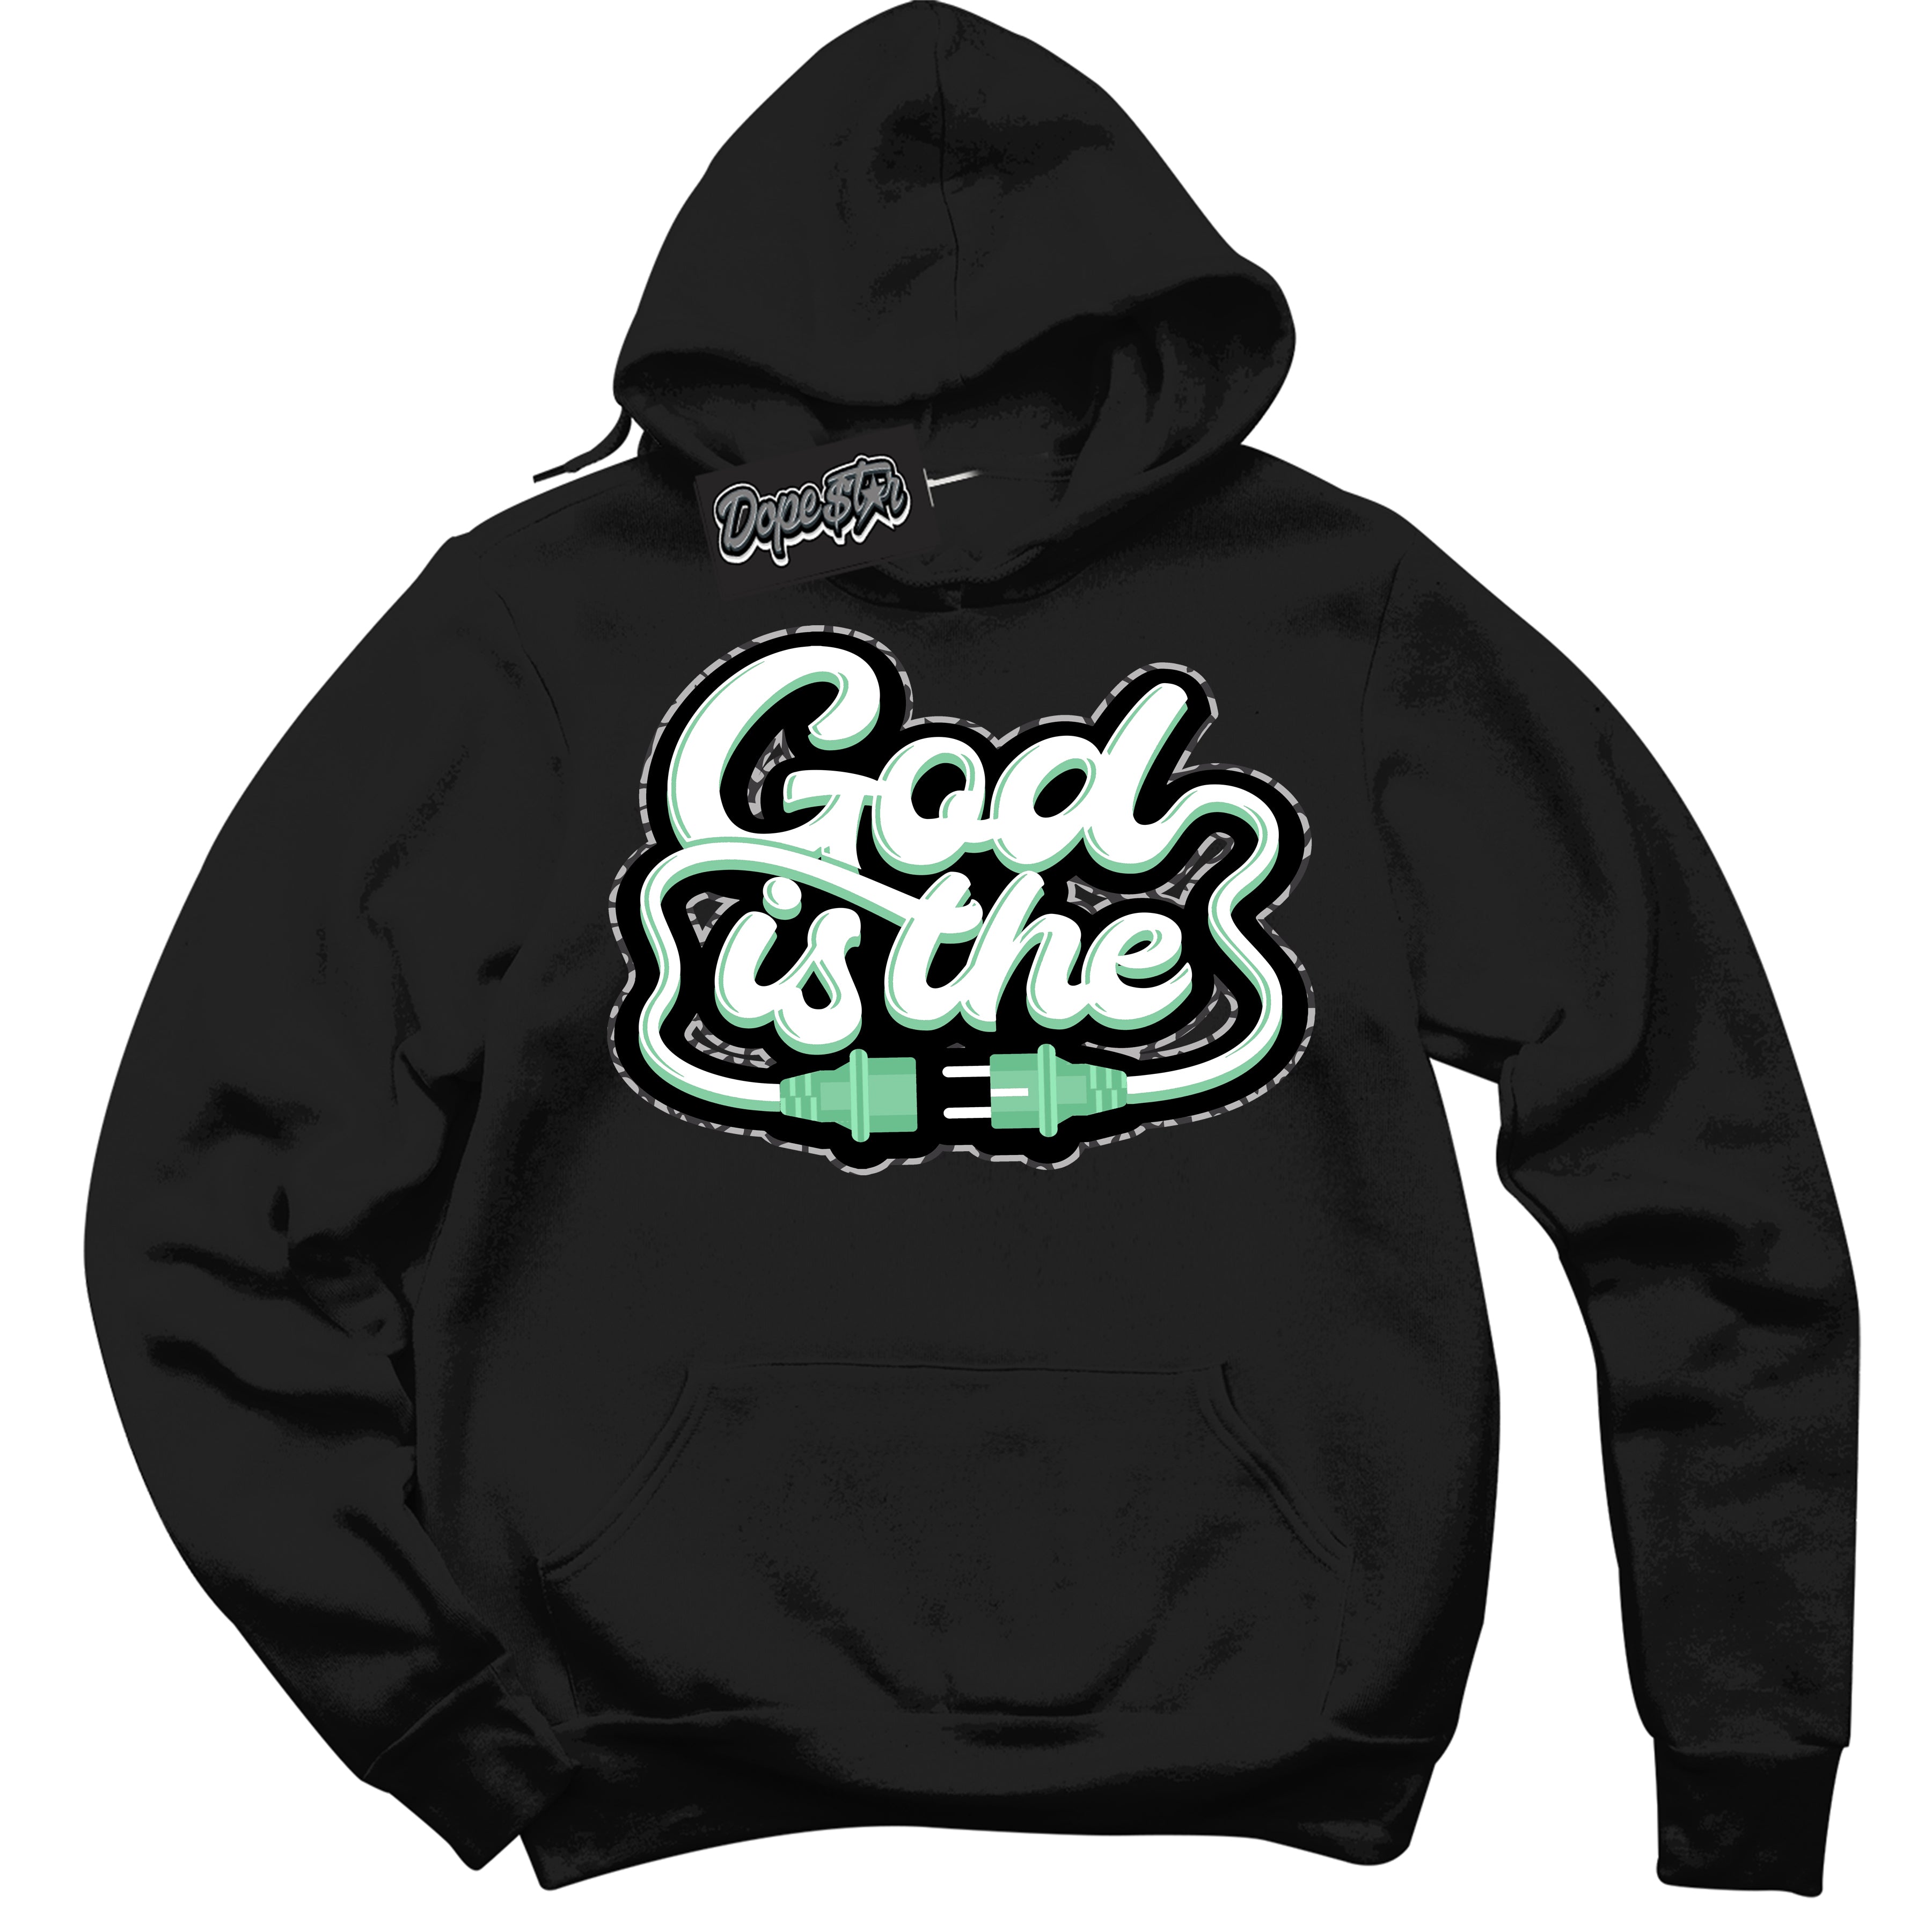 Cool Black Graphic DopeStar Hoodie with “ God Is The “ print, that perfectly matches Green Glow 3S sneakers